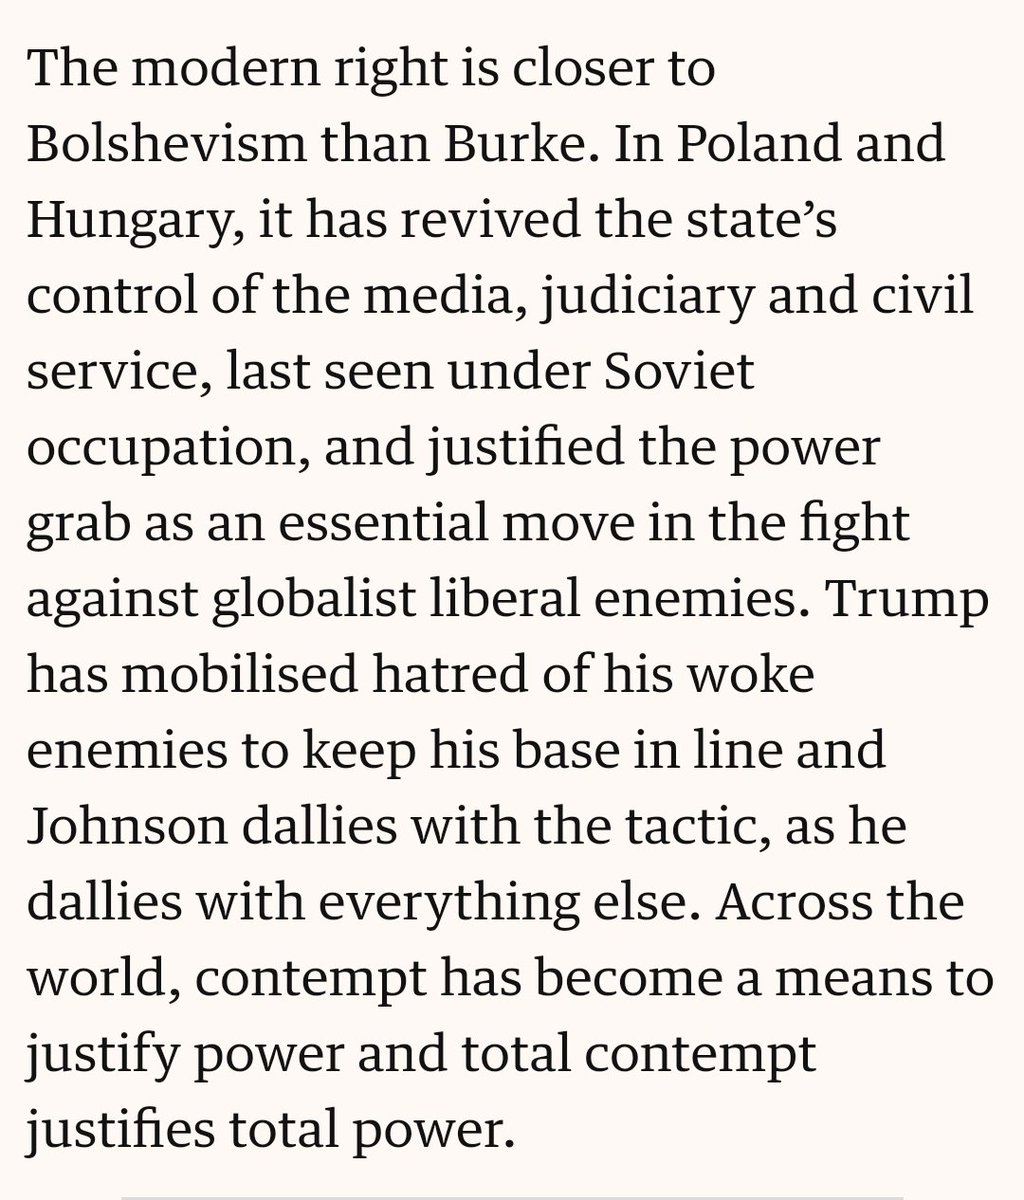 The modern right is closer to Bolshevism than to Burke ...  https://amp.theguardian.com/commentisfree/2020/jun/20/the-far-left-origins-of-no-10s-desperate-attack-on-all-things-woke-#click=https://t.co/MJ5GUxWU1g